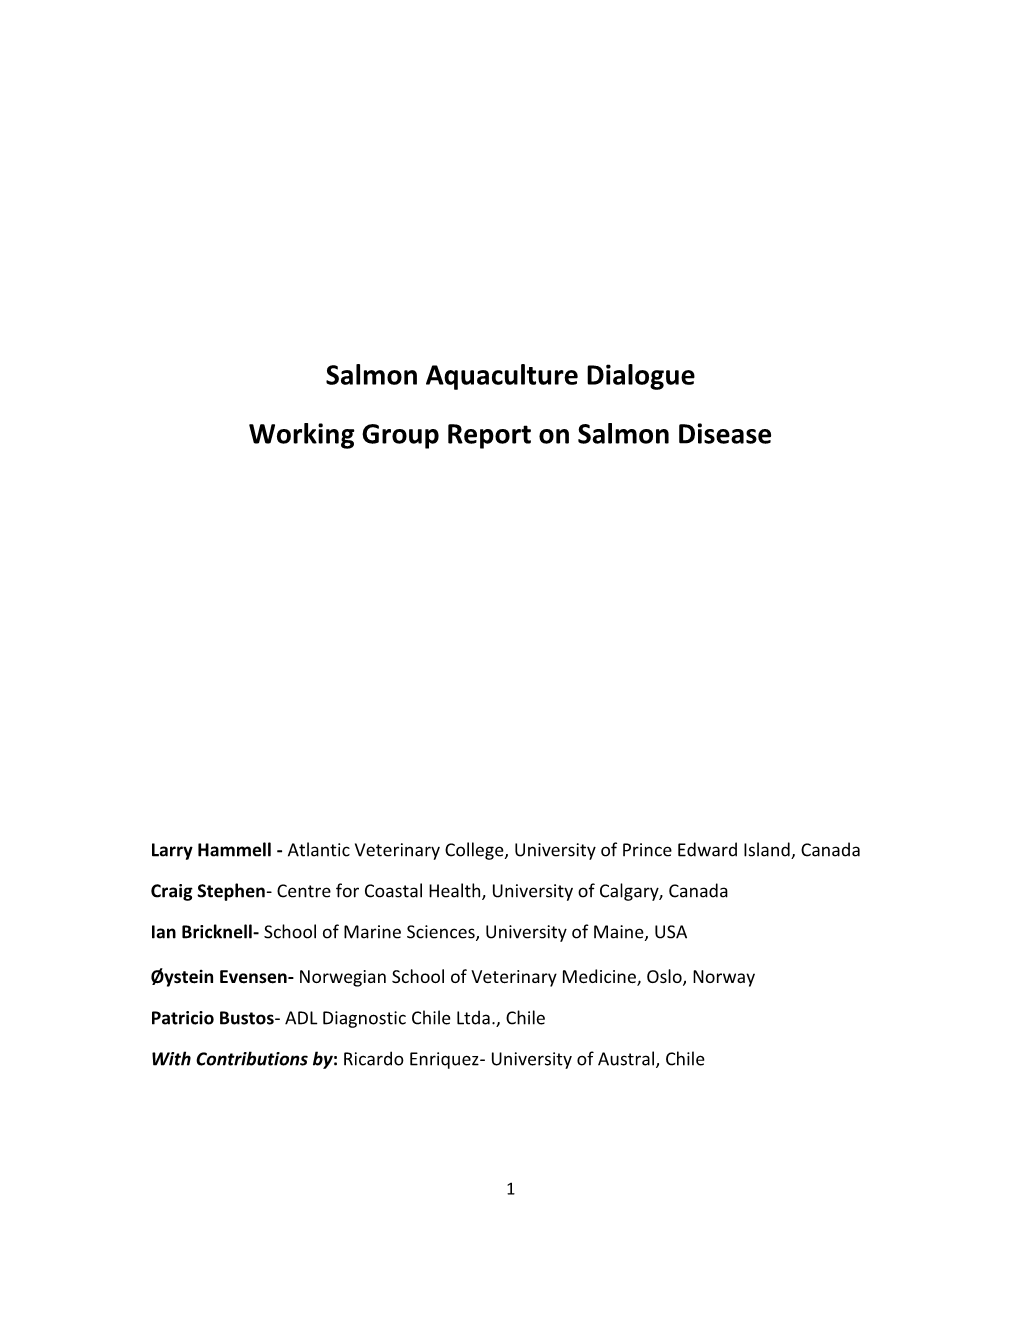 Salmon Aquaculture Dialogue Working Group Report on Salmon Disease